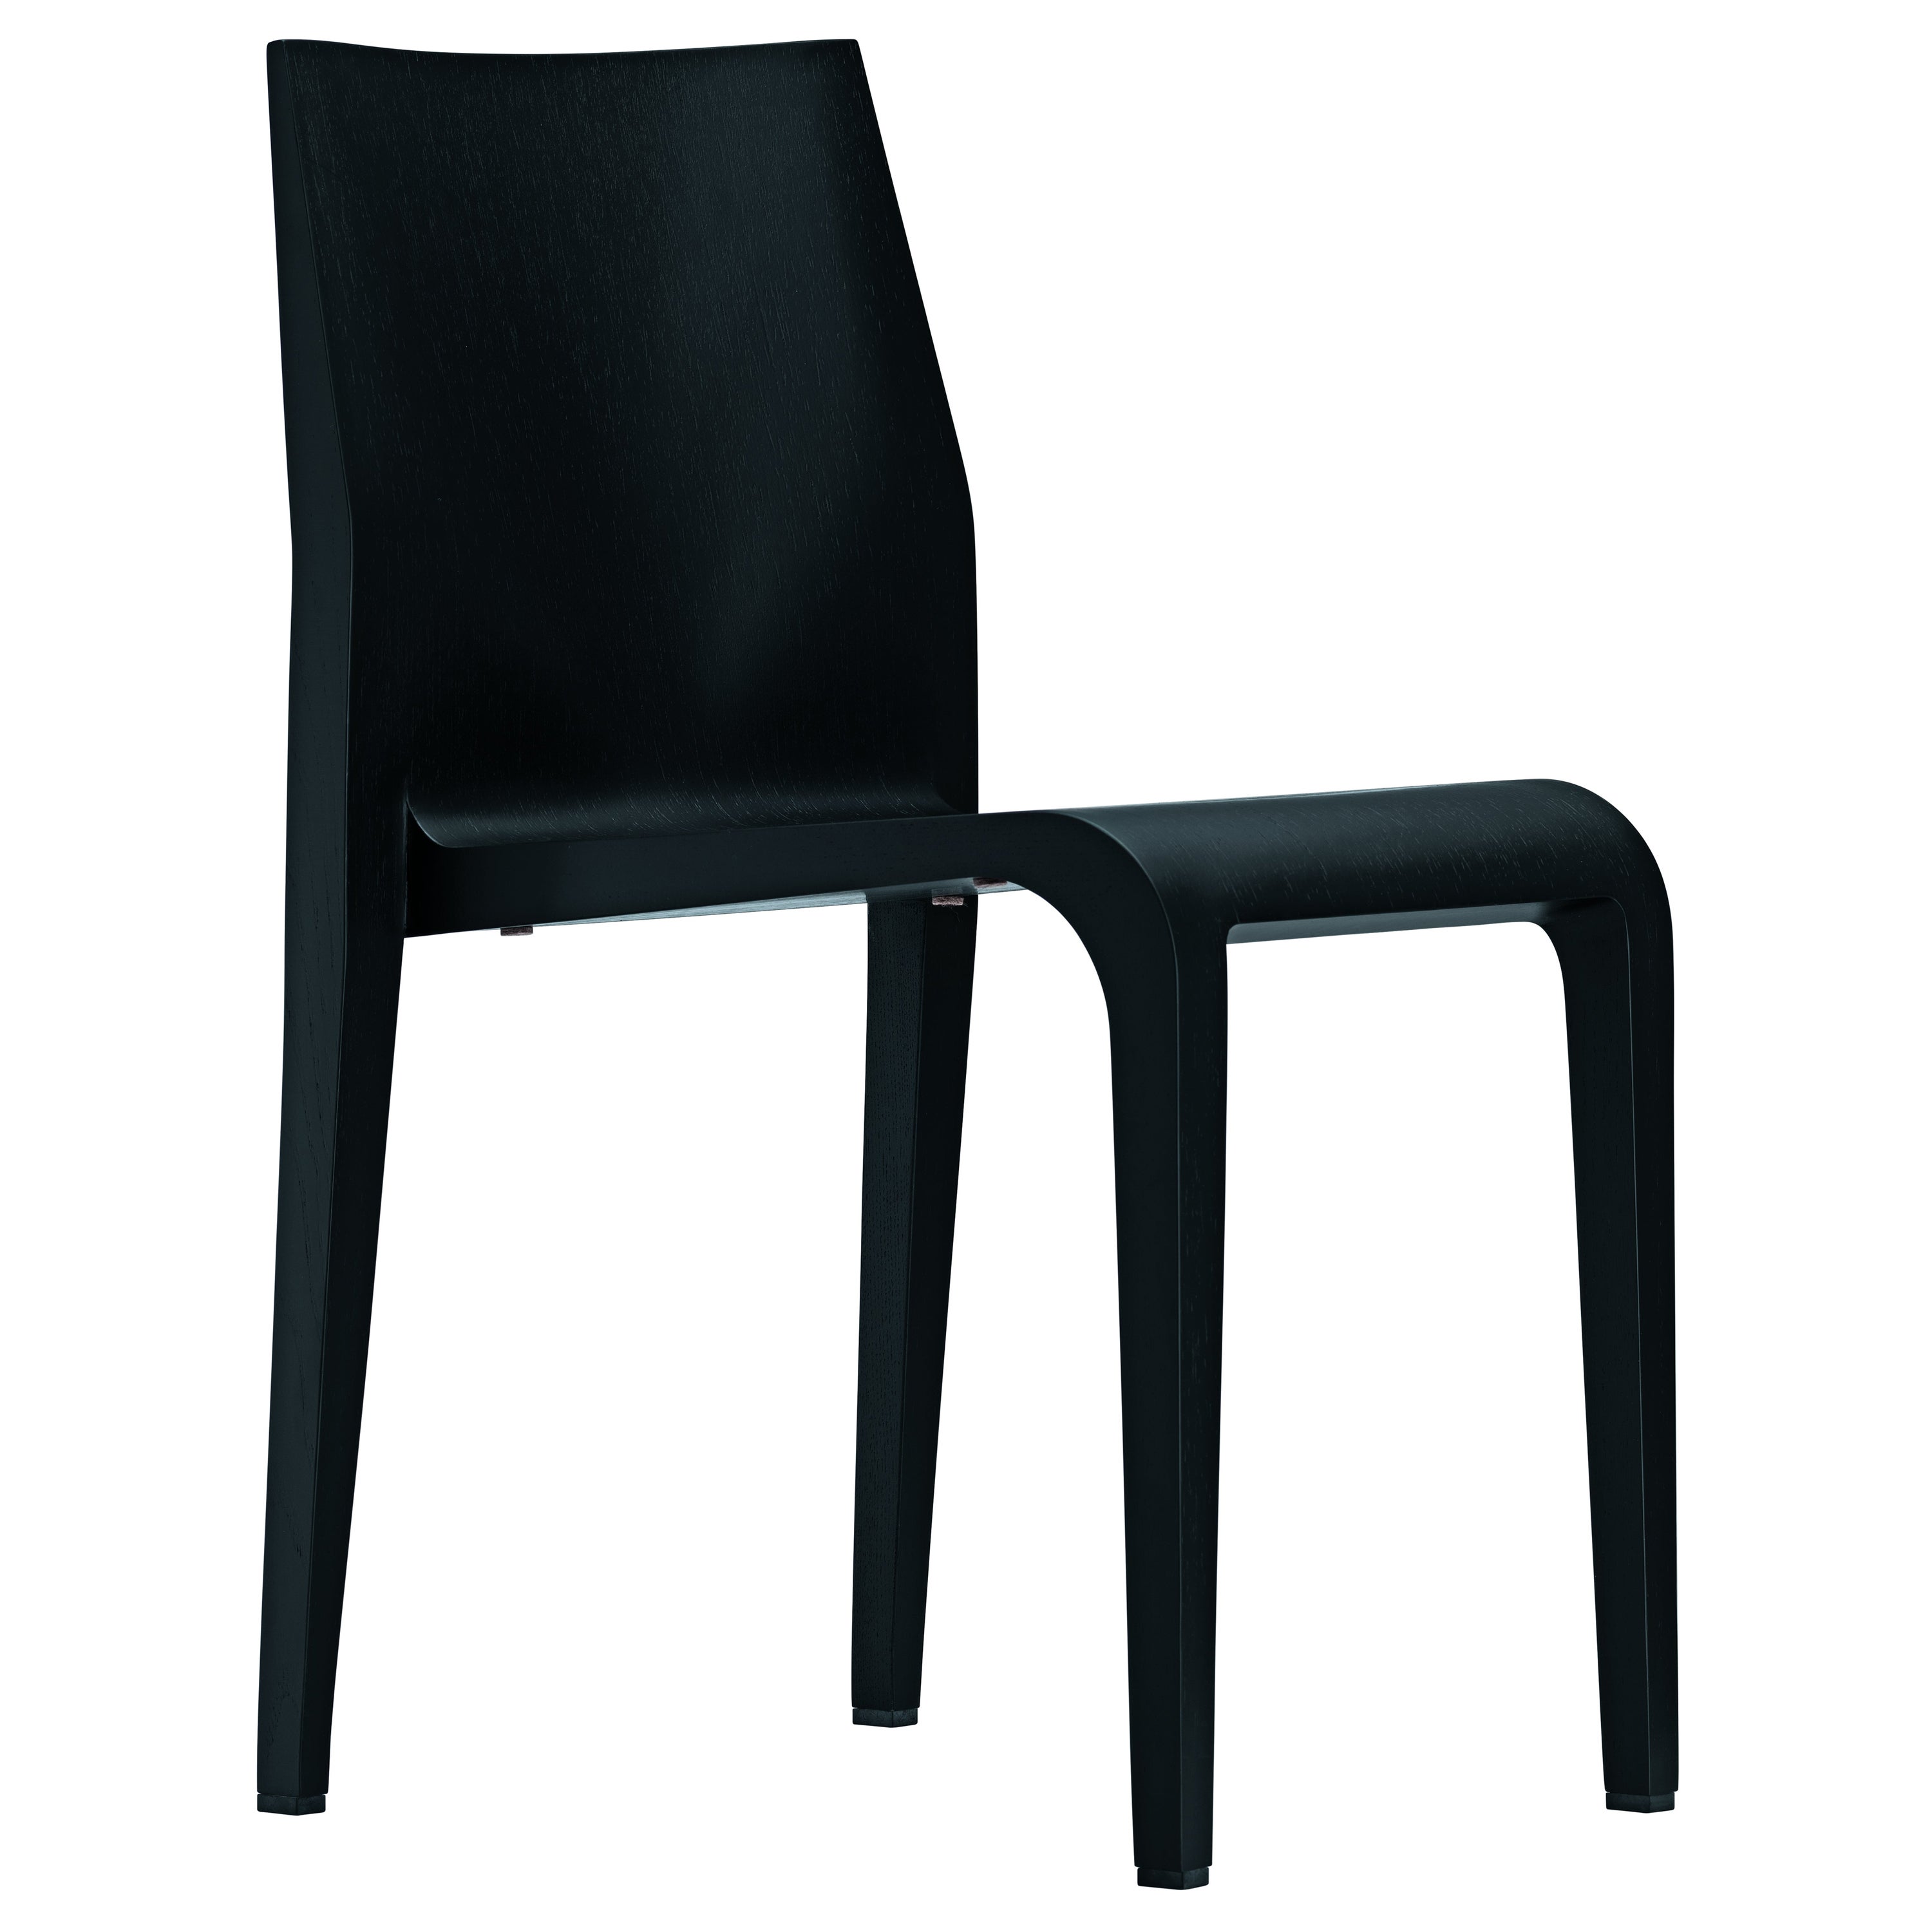 Alias 301 Laleggera Chair in Black Color Stained Wood by Riccardo Blumer